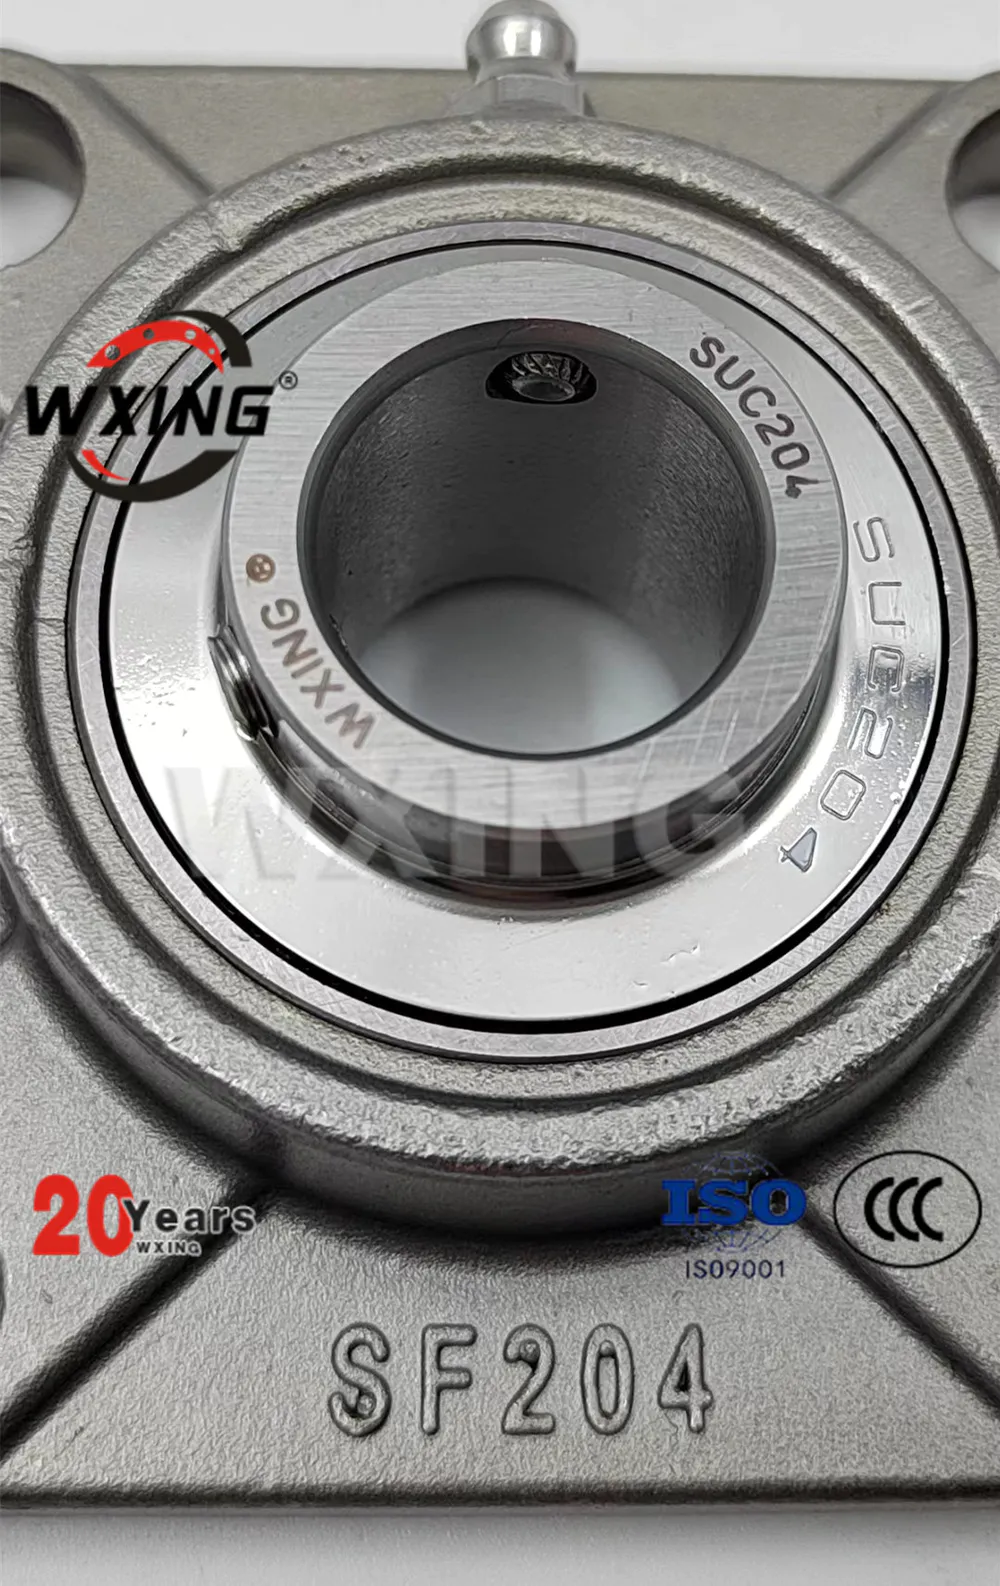 SUC204 tri-seal triple seal stainless steel insert ball bearing